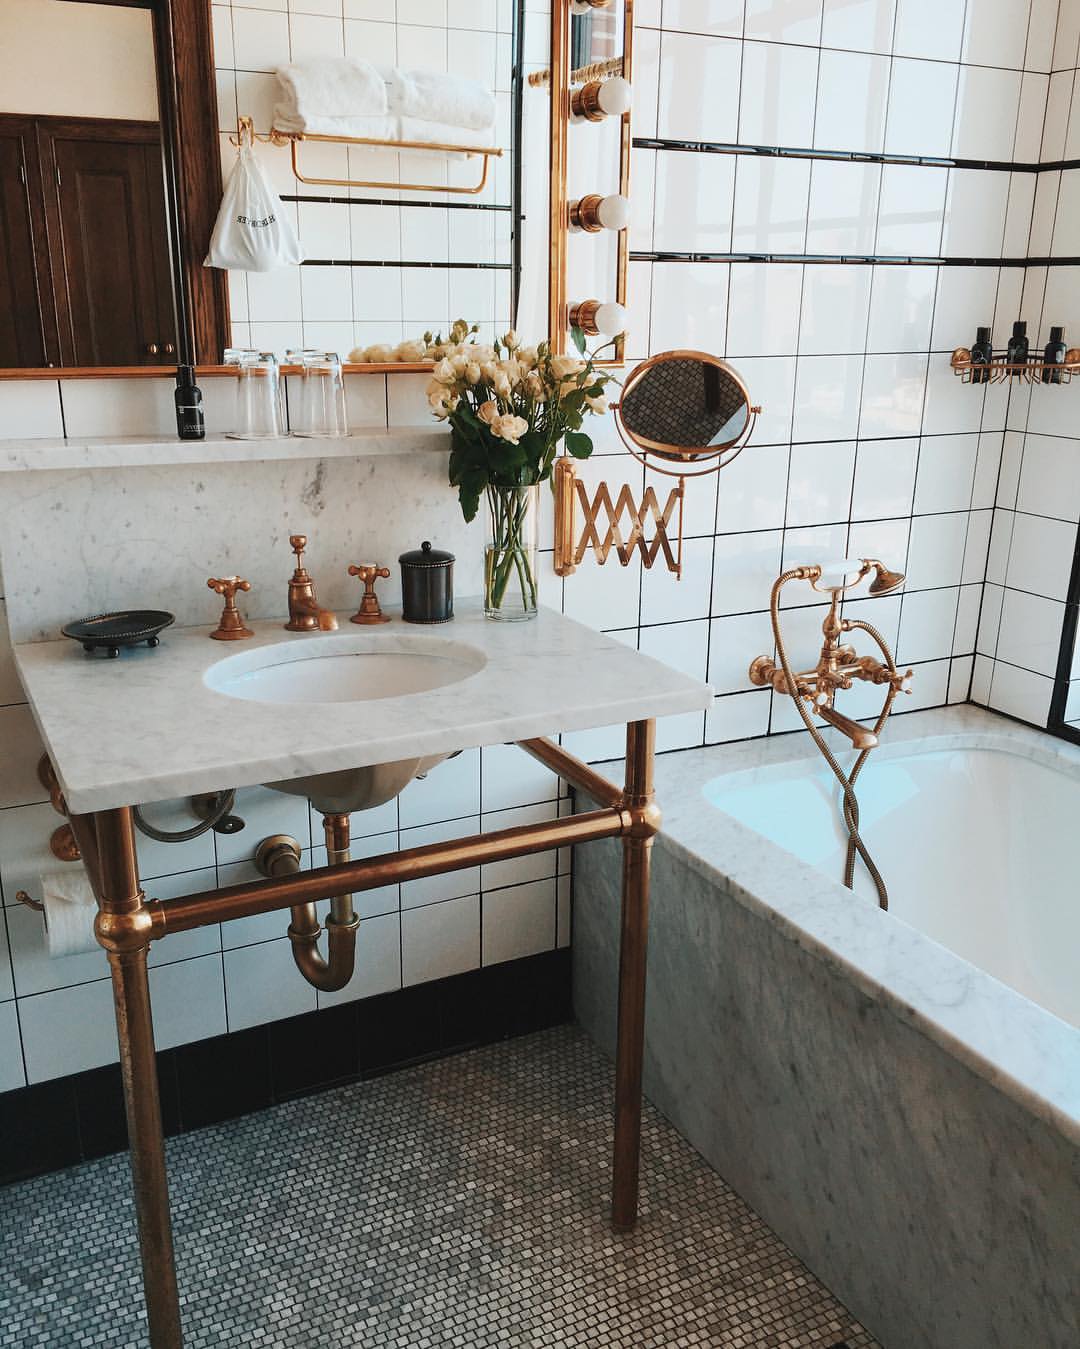 A luxurious bathroom featuring a marble sink and many copper fixtures.